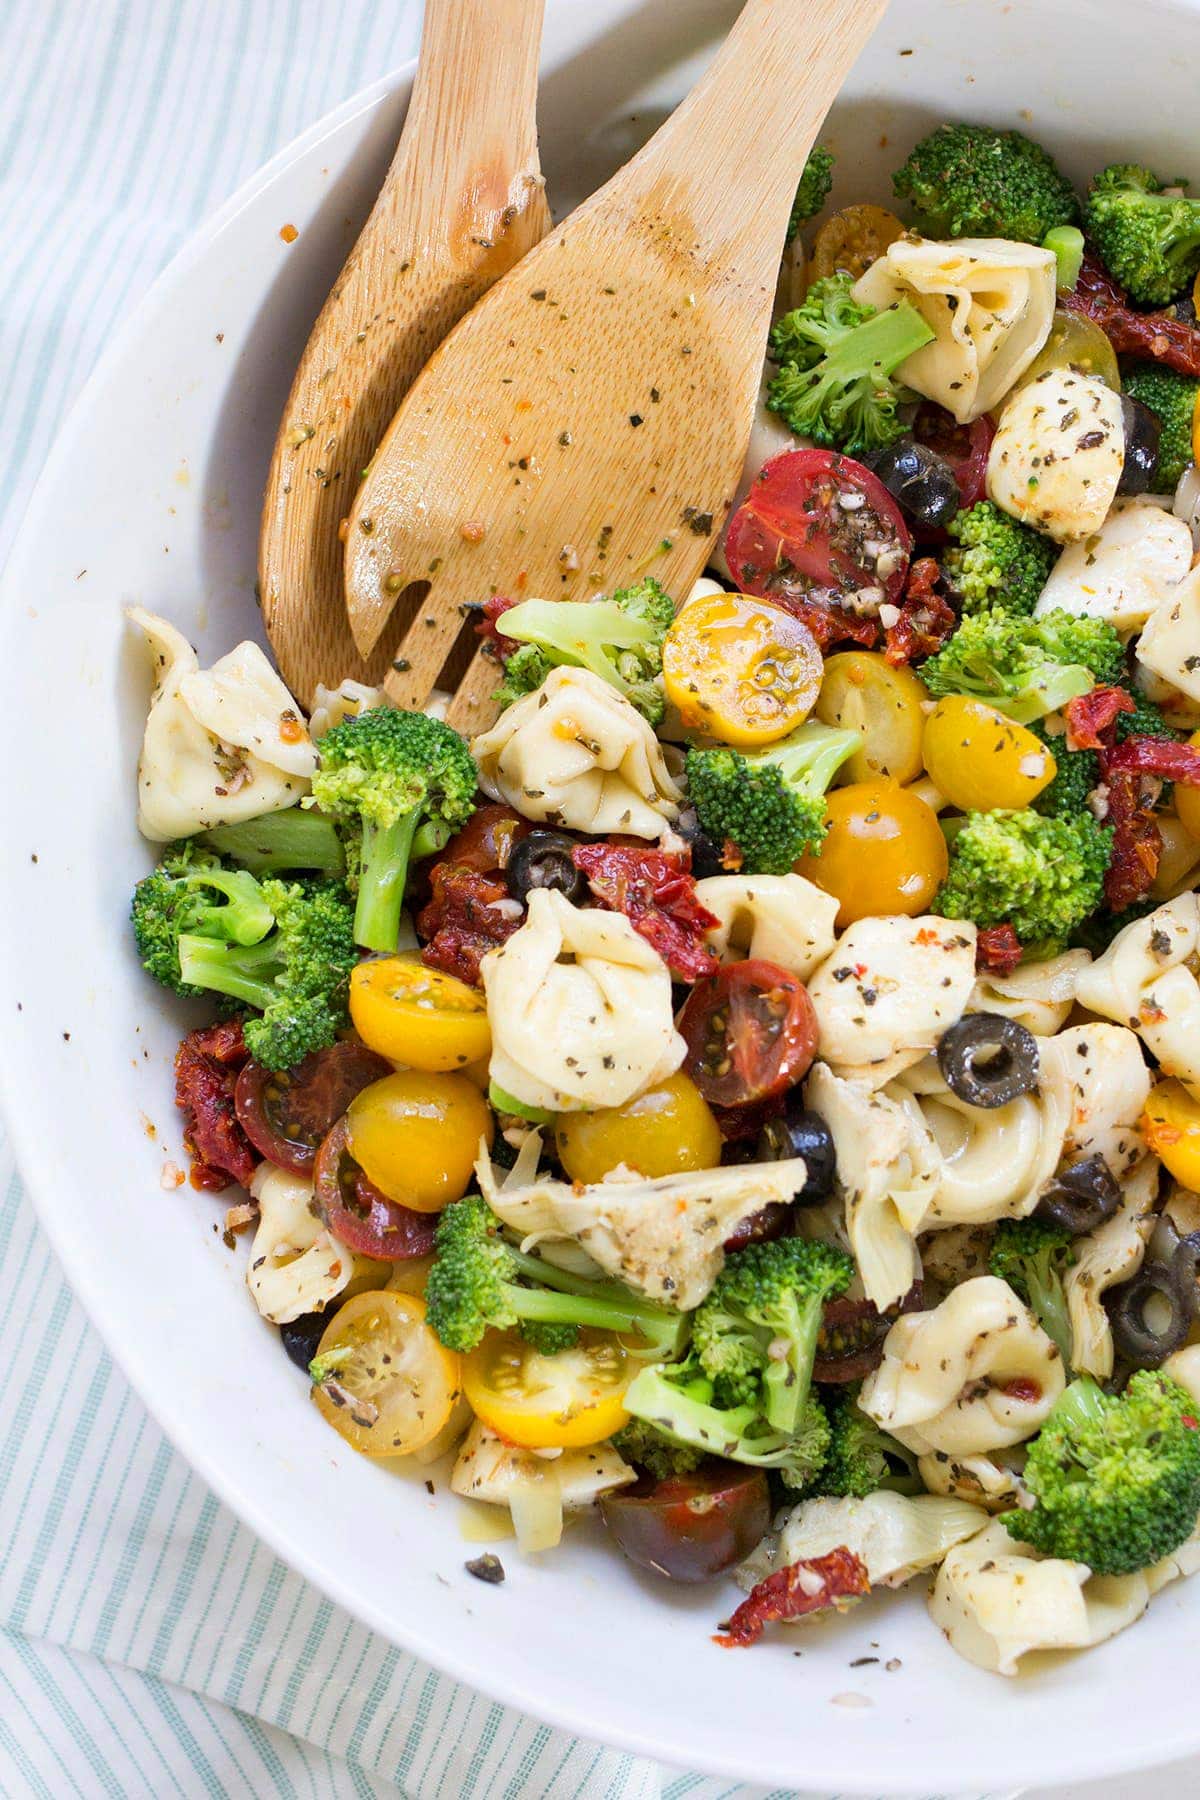 Easy Tortellini Pasta Salad with Sundried Tomatoes and Artichoke Hearts